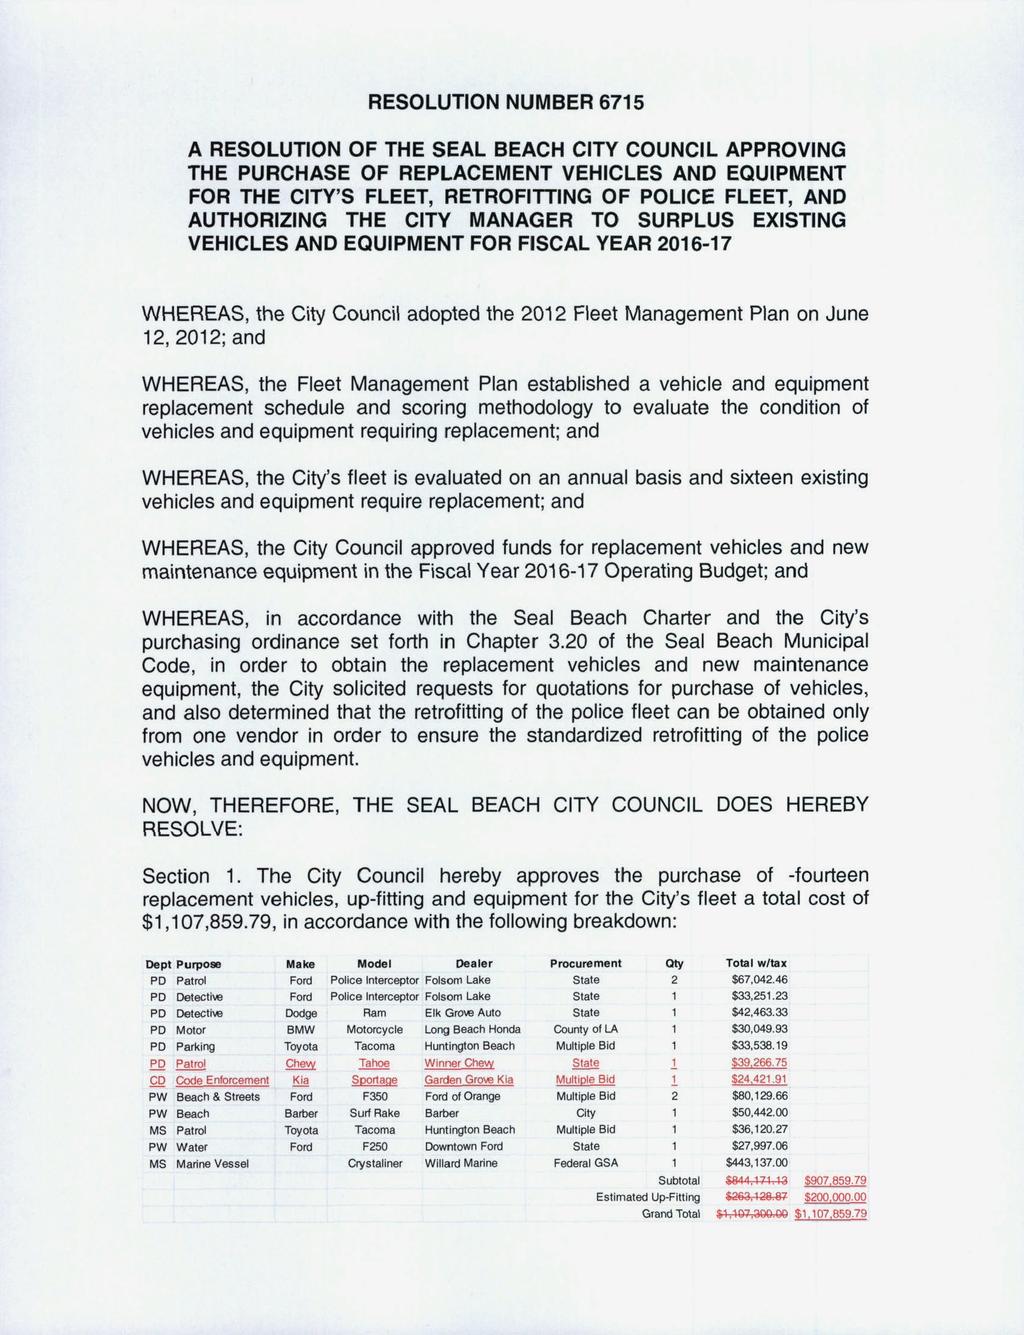 RESOLUTION NUMBER 6715 A RESOLUTION OF THE SEAL BEACH CITY COUNCIL APPROVING THE PURCHASE OF REPLACEMENT VEHICLES AND EQUIPMENT FOR THE CITY' S FLEET, RETROFITTING OF POLICE FLEET, AND AUTHORIZING